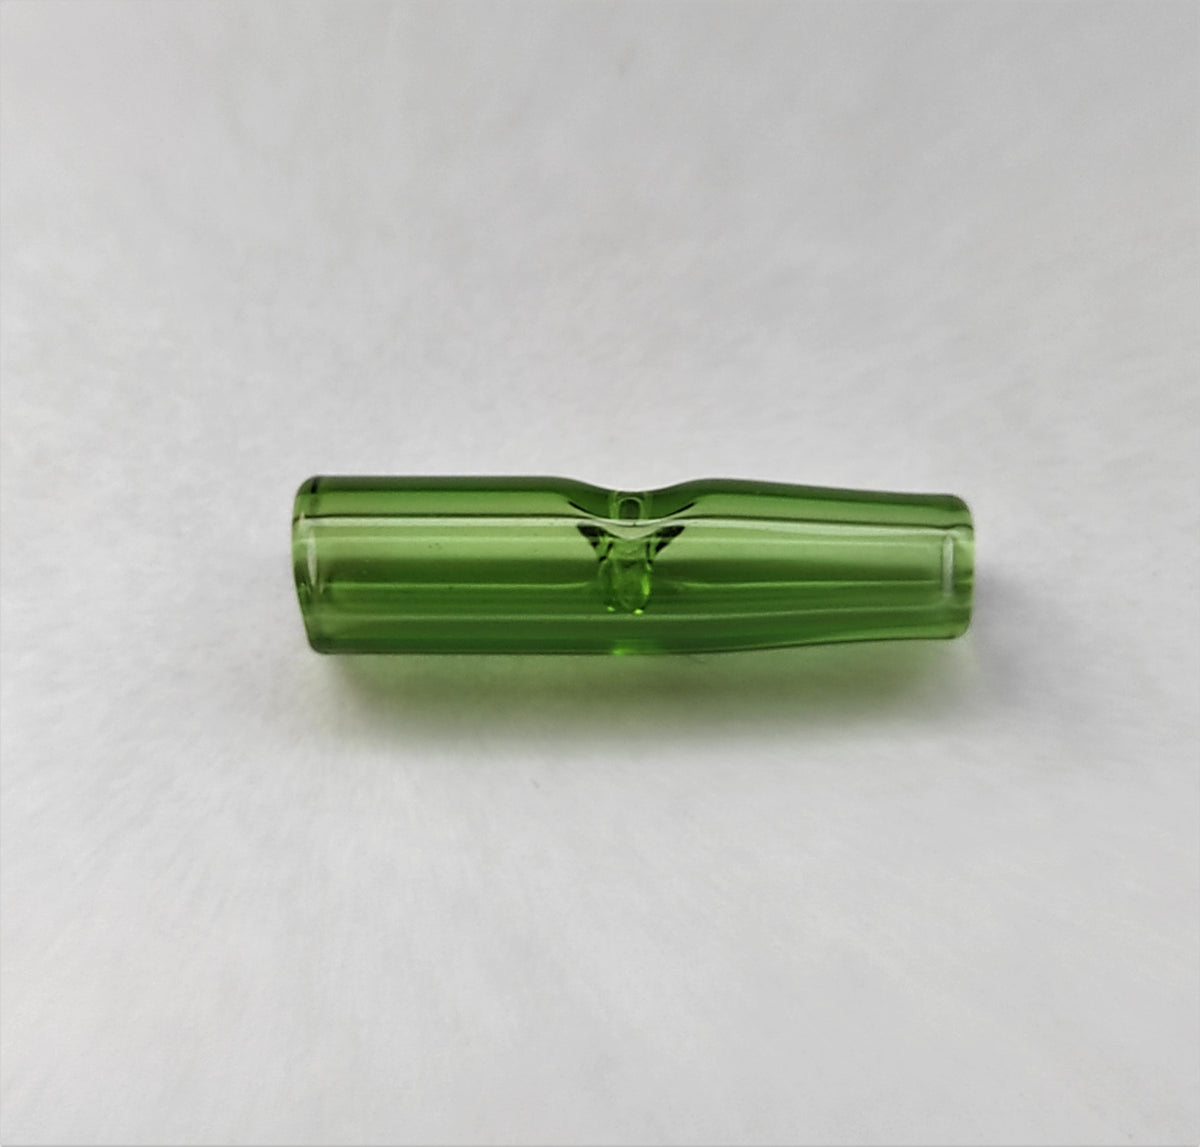 OutonTrip Re-useable Small Glass Filter Tip - Round Mouthpiece